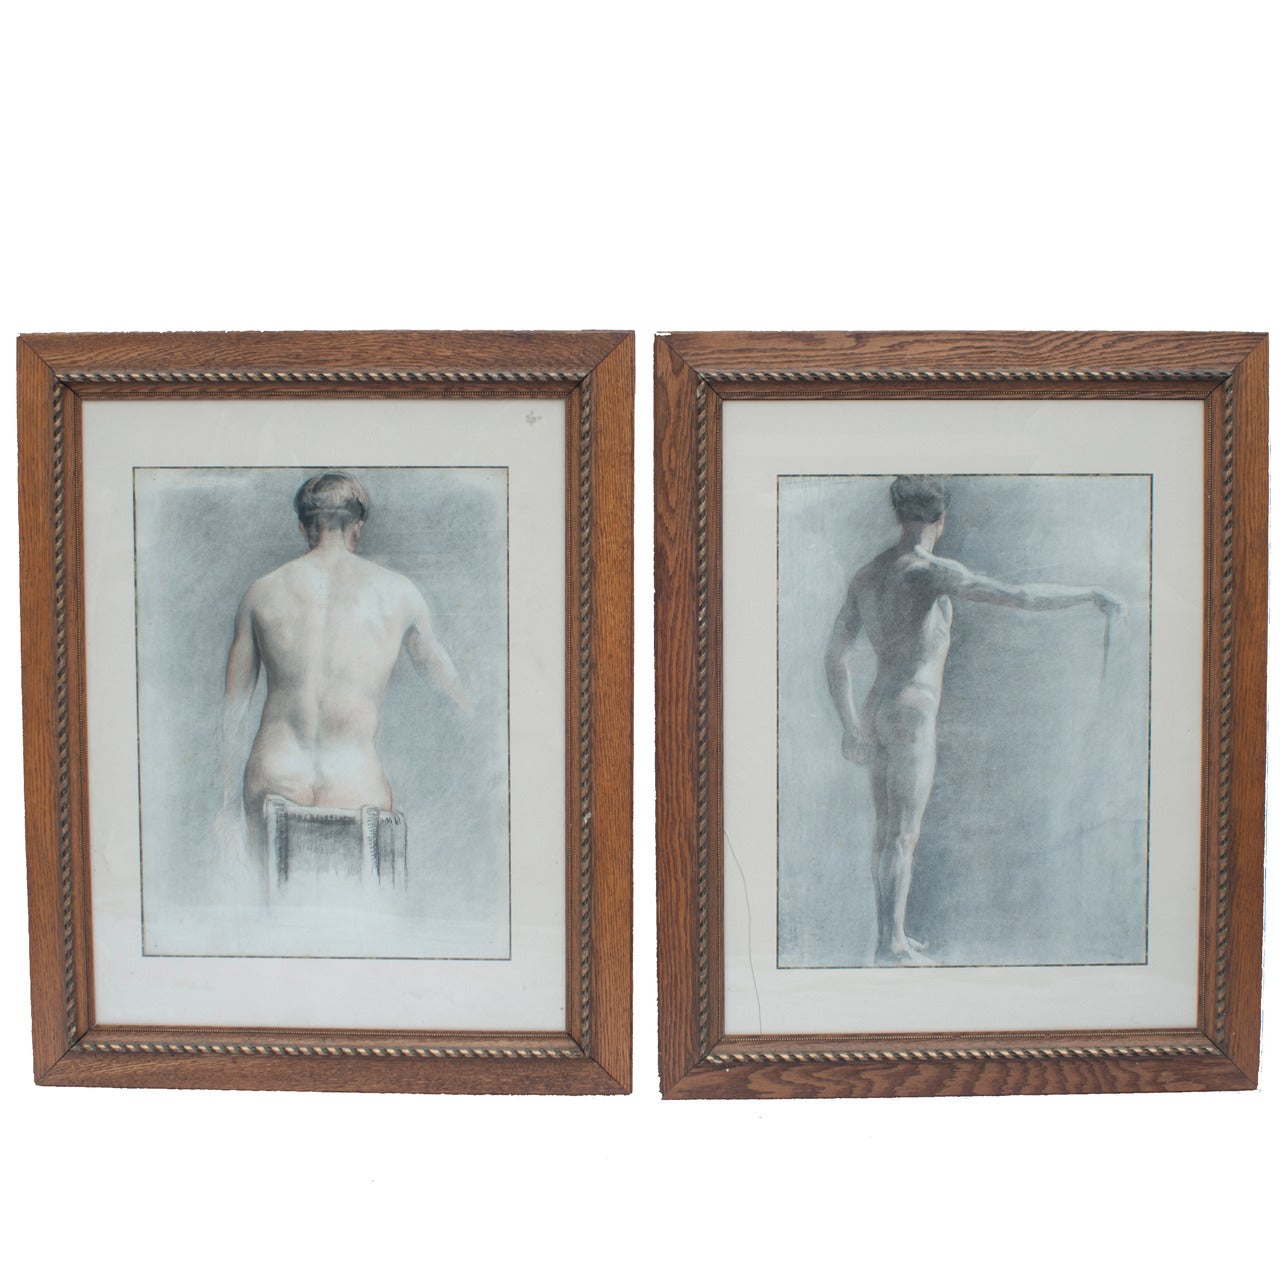 Pair of Academic Drawings of a Man's Back